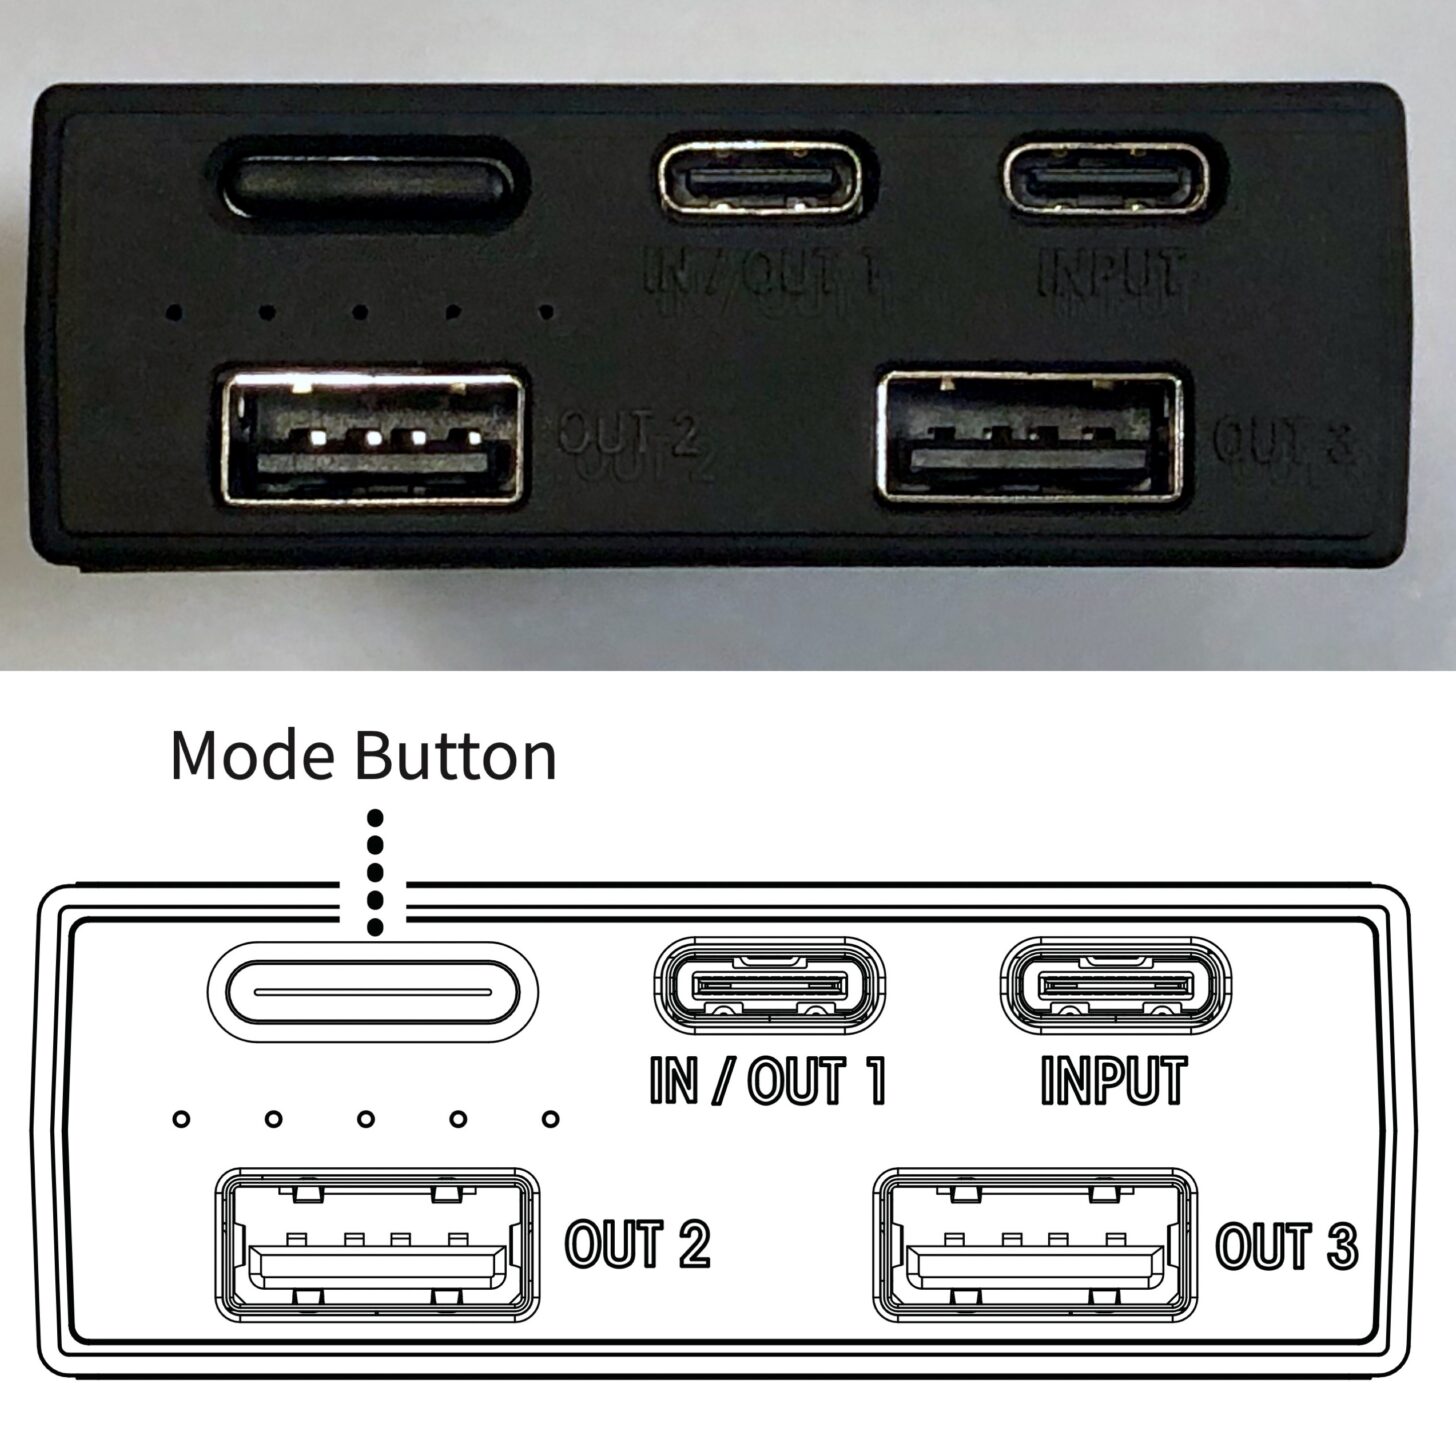 Top: The Nitecore 20K USB ports and other features under bright lights. Bottom: A helpful drawing from the manual. The upper two ports are USB-C; the lower ports are USB-A.